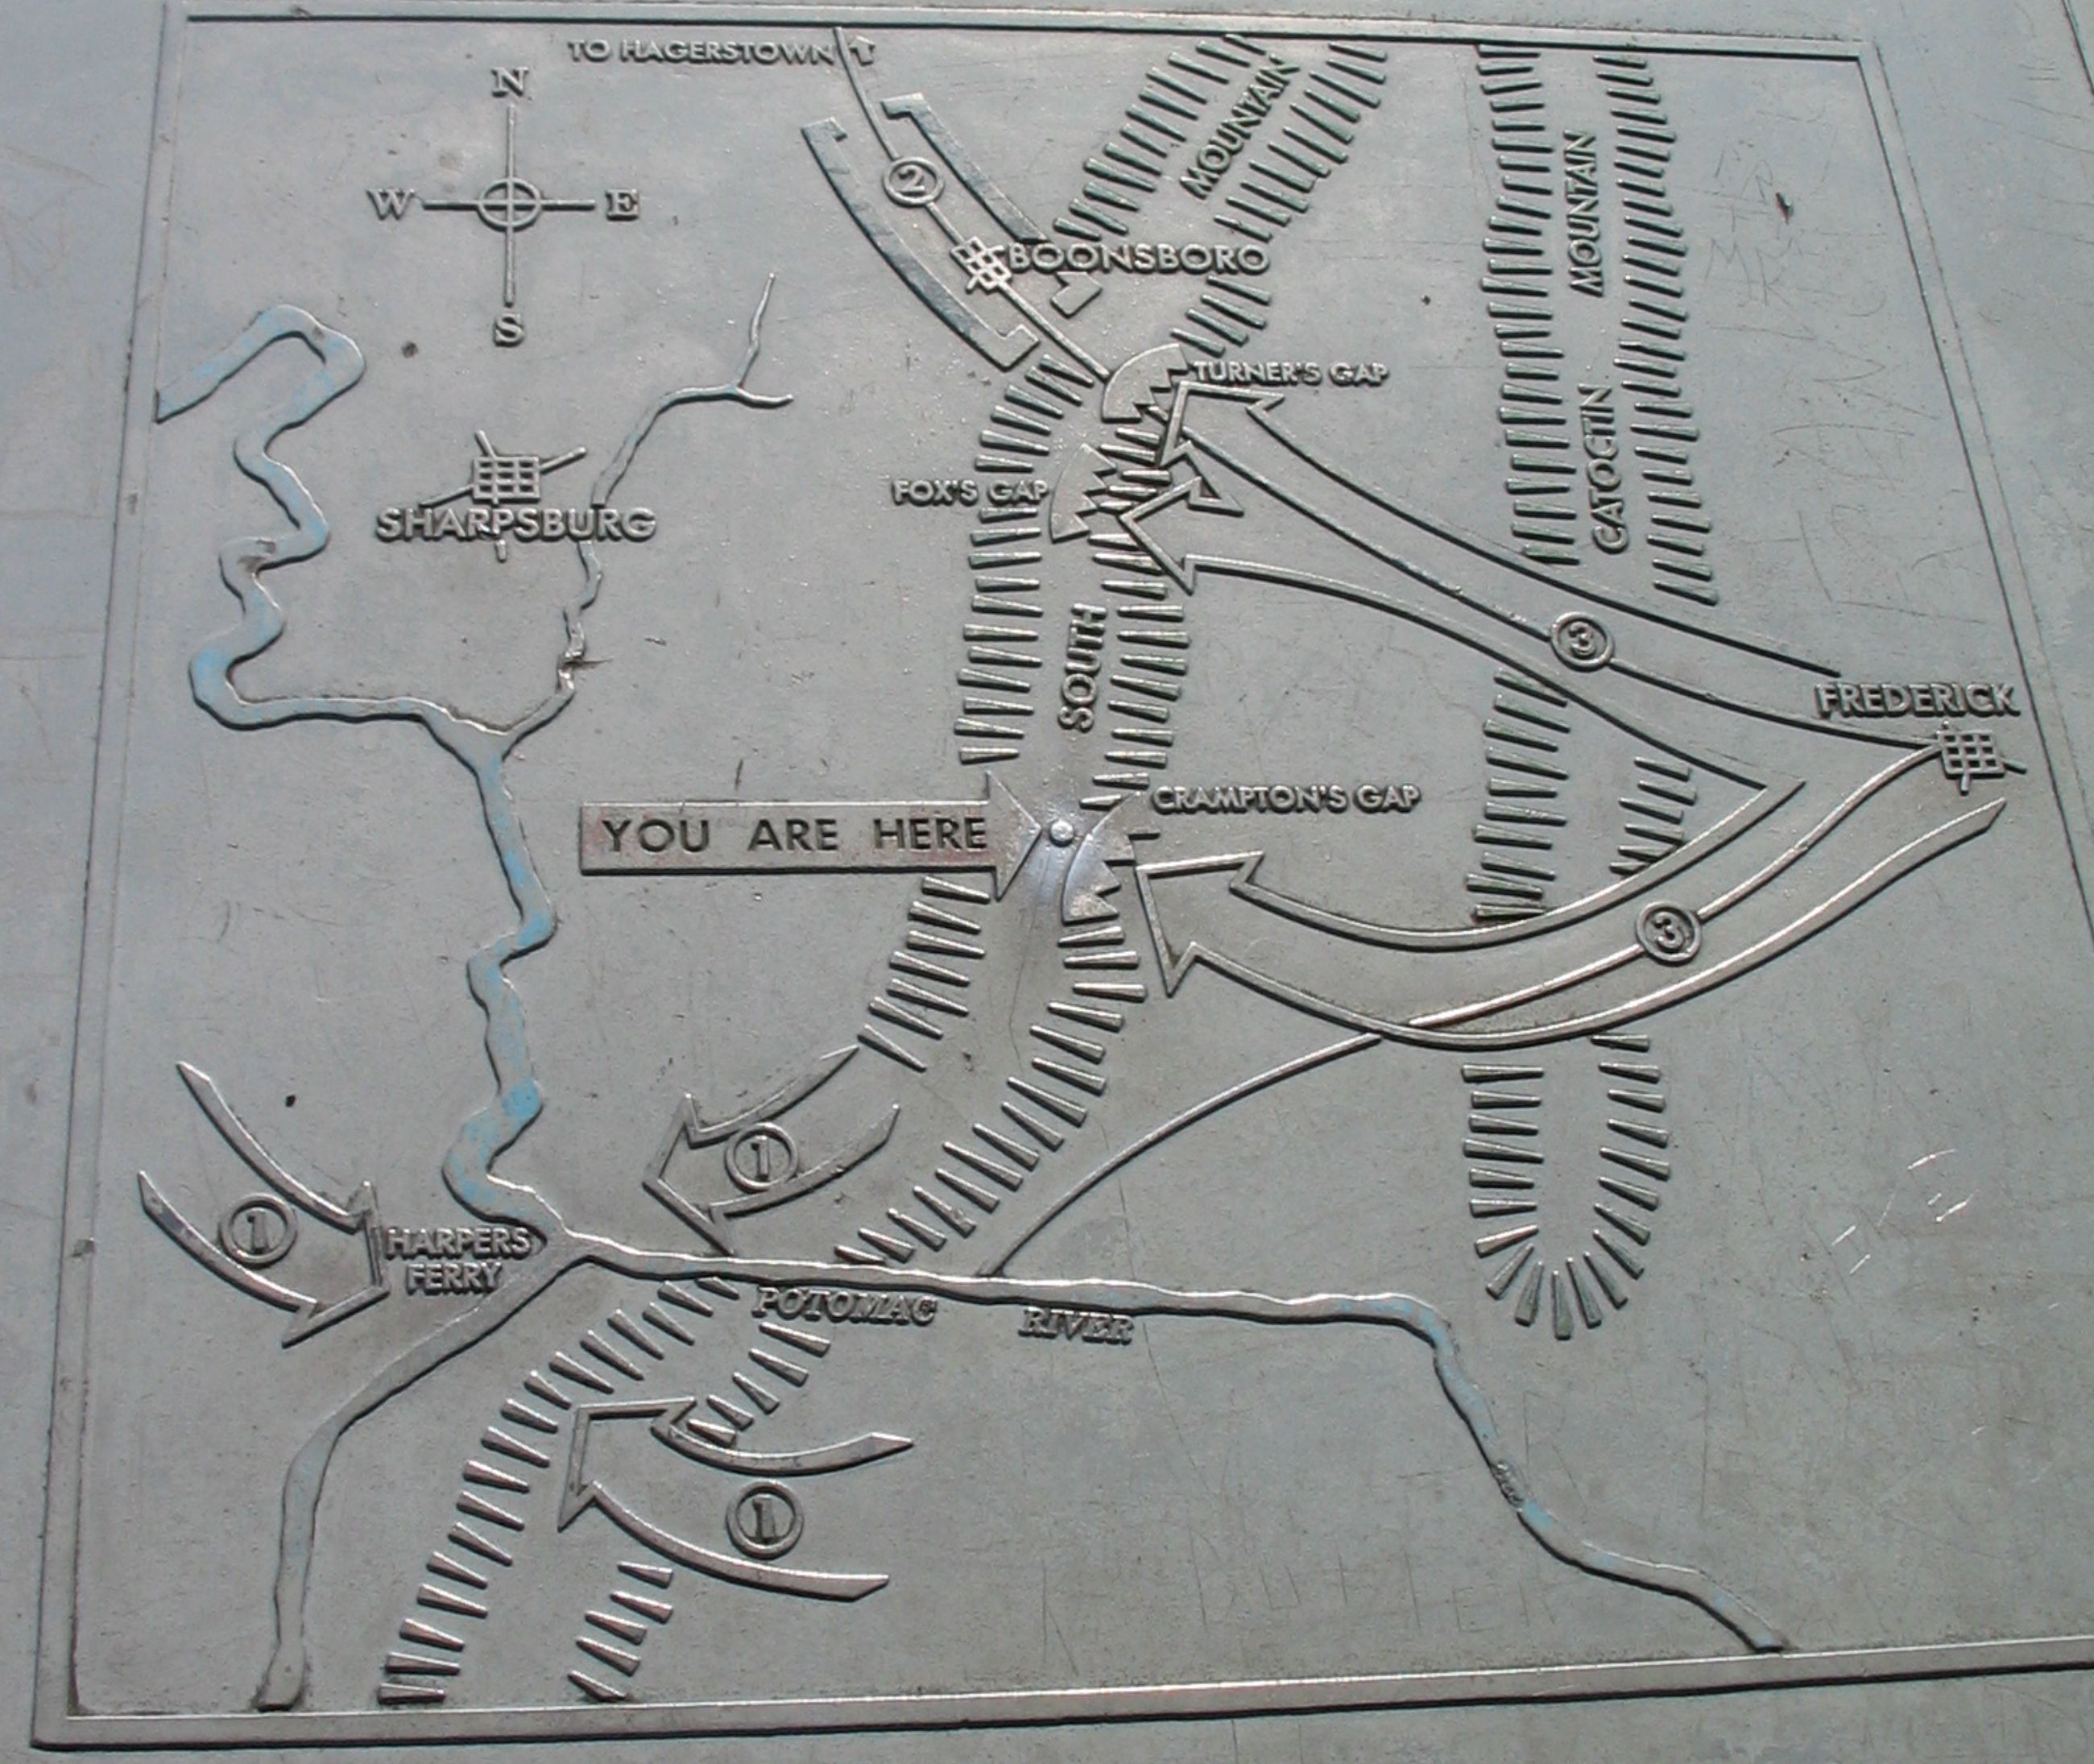 Close Up View of the Map